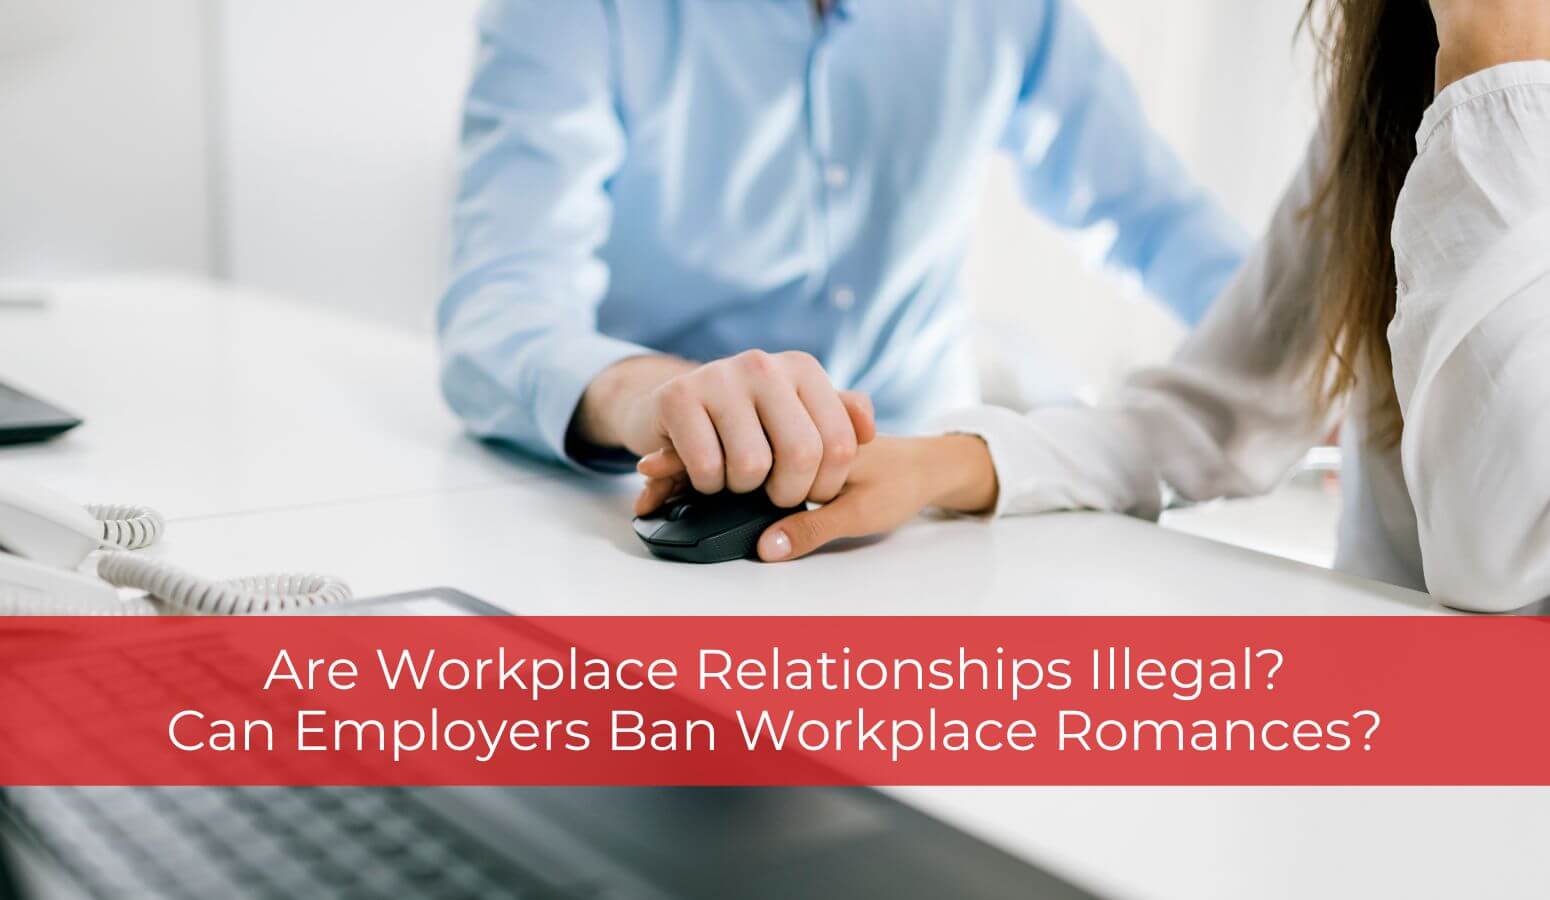 Featured image for “Are Workplace Relationships Illegal?”